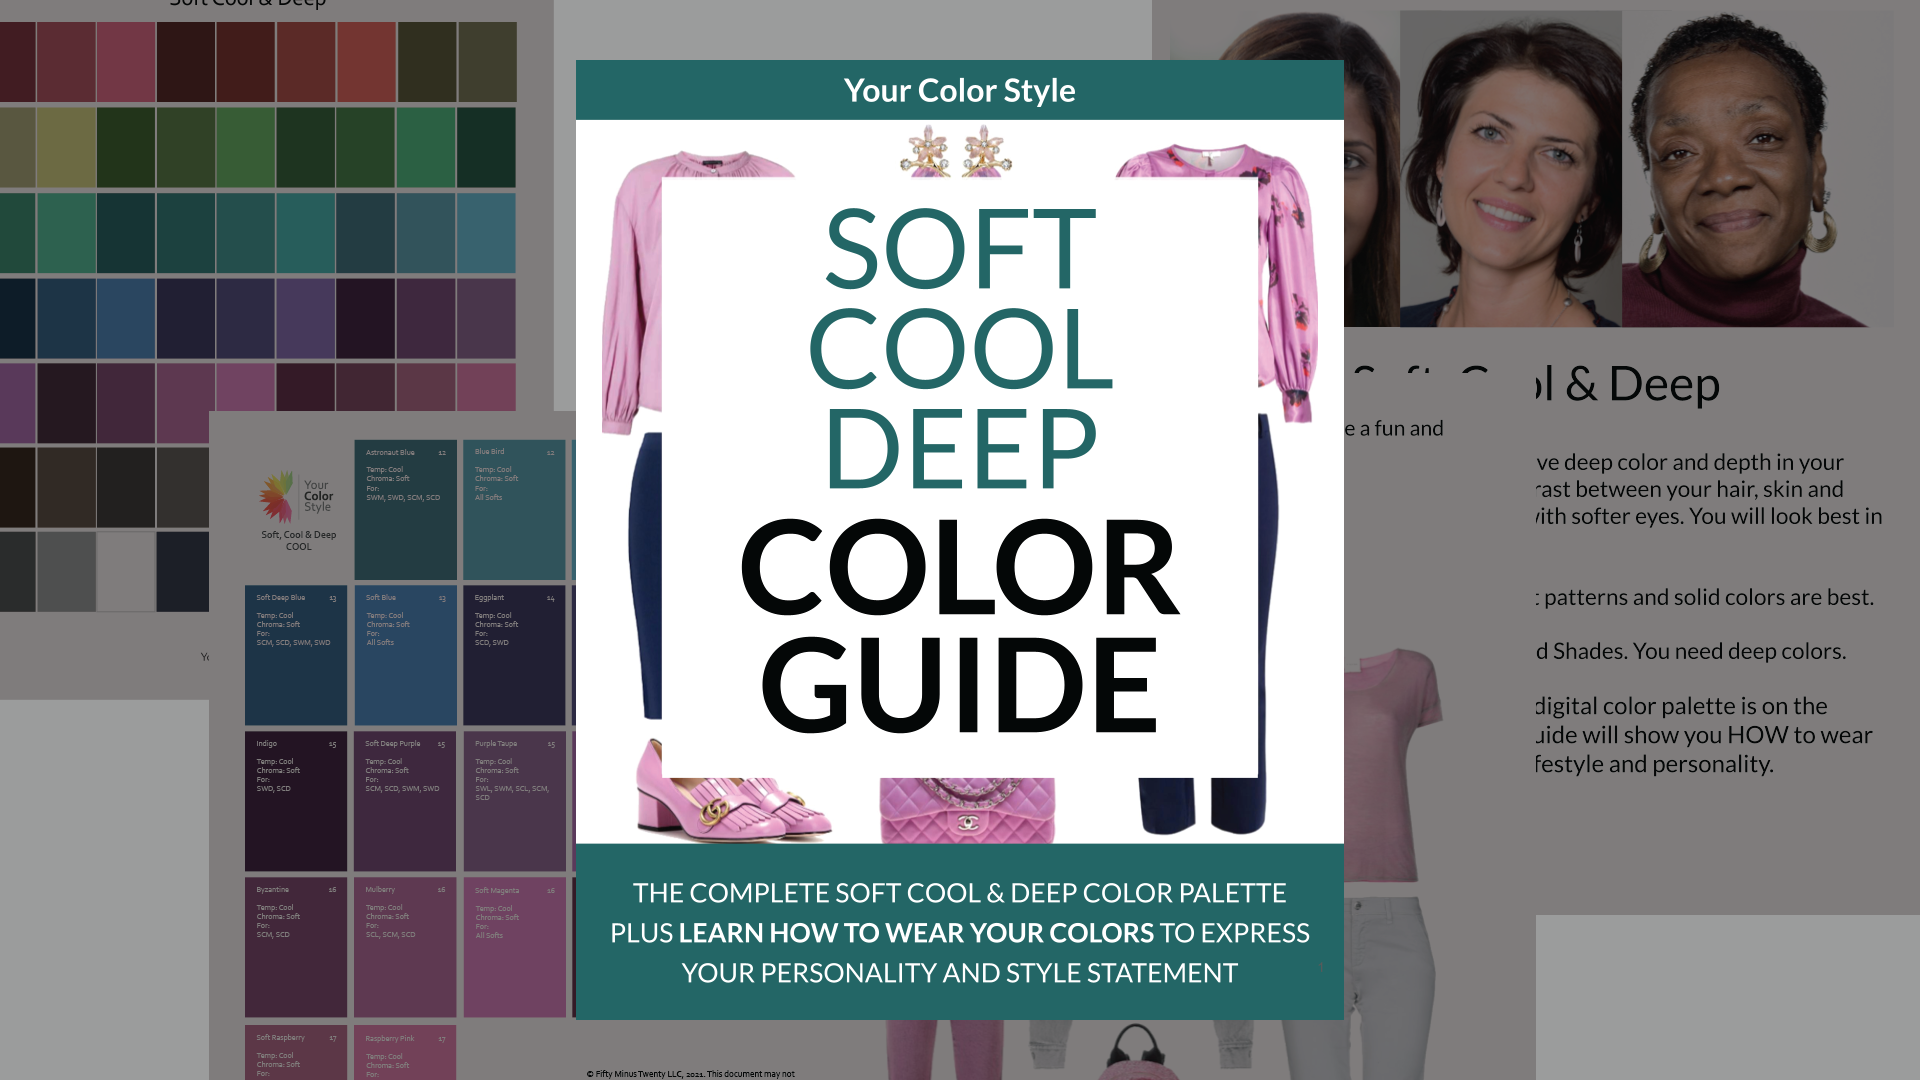 Soft Cool Deep Color Guide